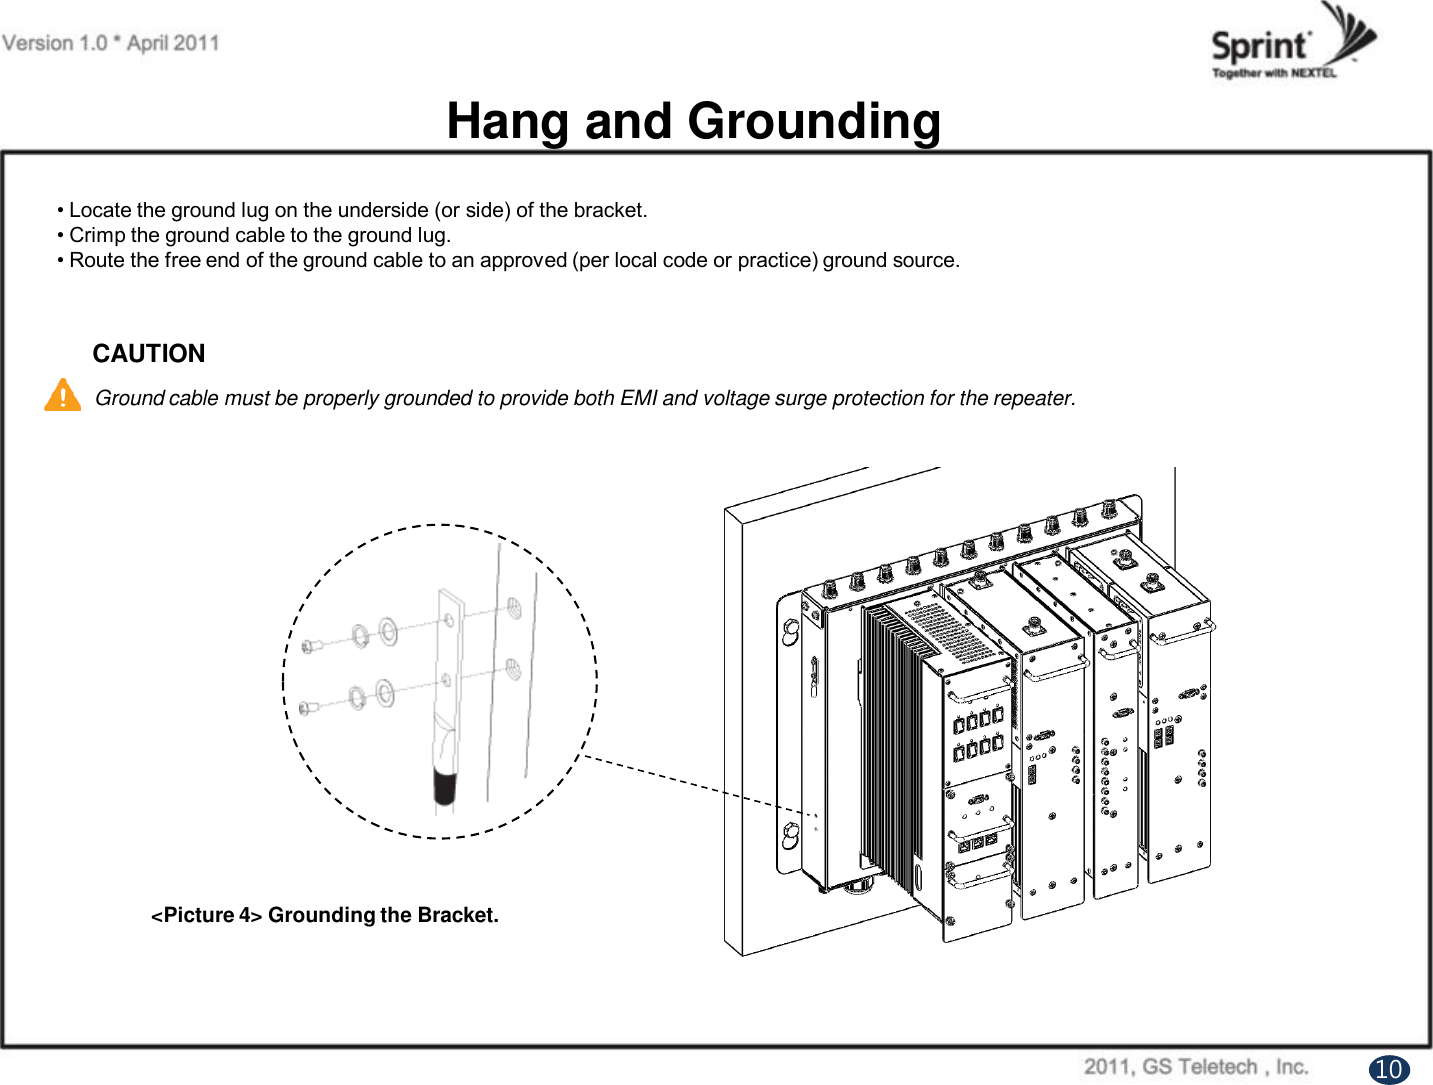 Hang and Grounding&lt;Picture 4&gt; Grounding the Bracket.• Locate the ground lug on the underside (or side) of the bracket.• Crimp the ground cable to the ground lug.• Route the free end of the ground cable to an approved (per local code or practice) ground source.CAUTIONGround cable must be properly grounded to provide both EMI and voltage surge protection for the repeater.10